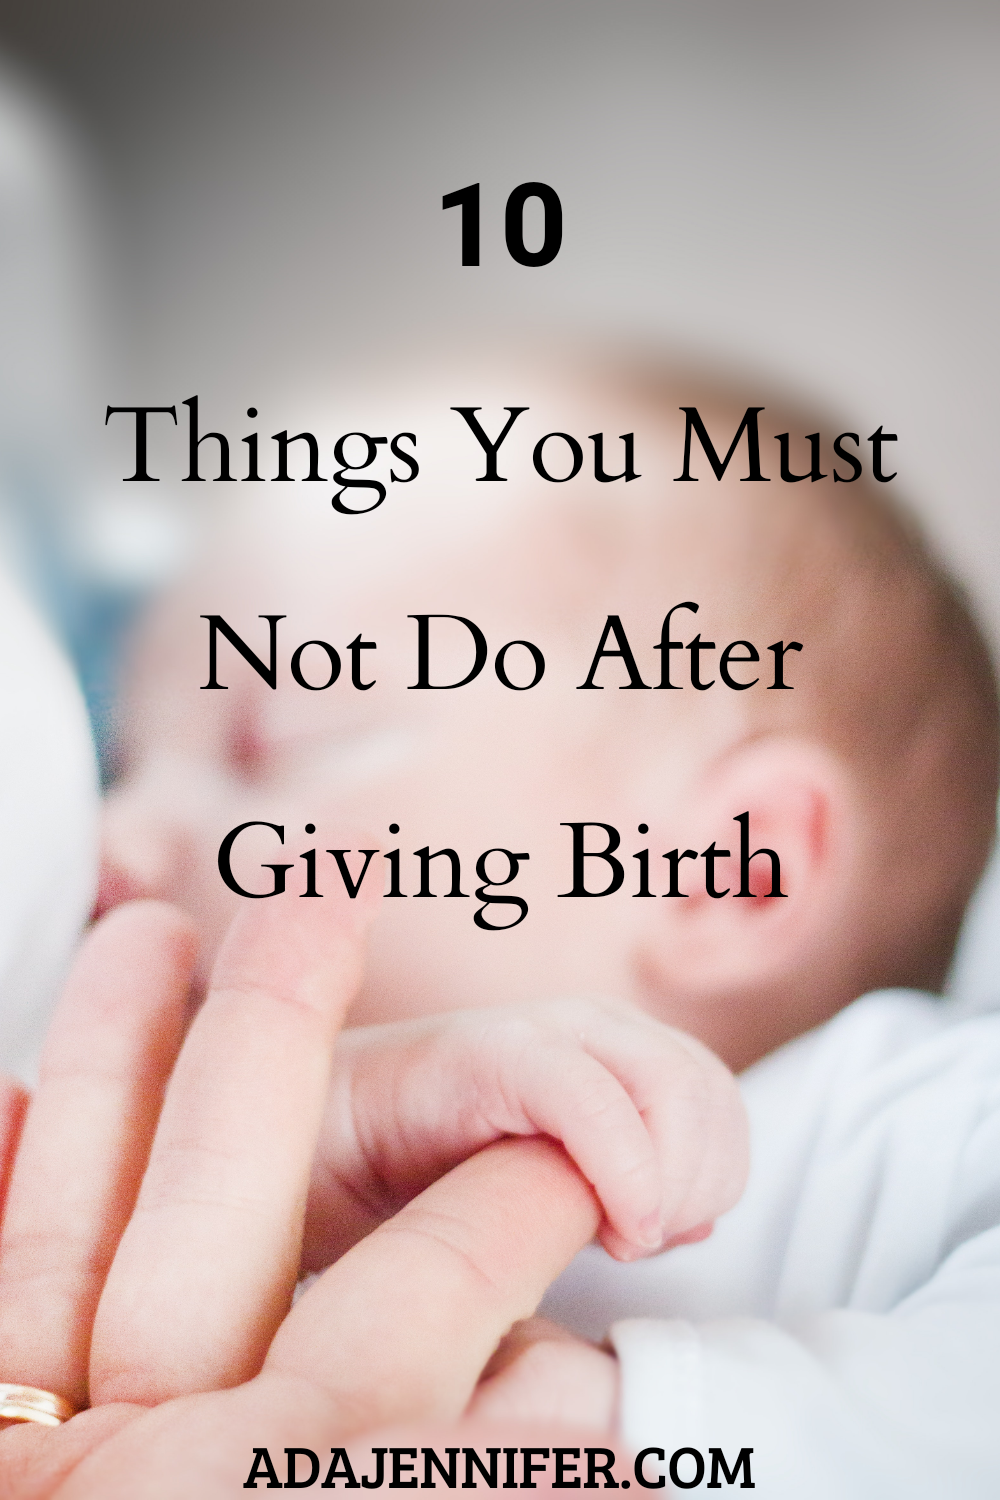 Restrictions after giving birth